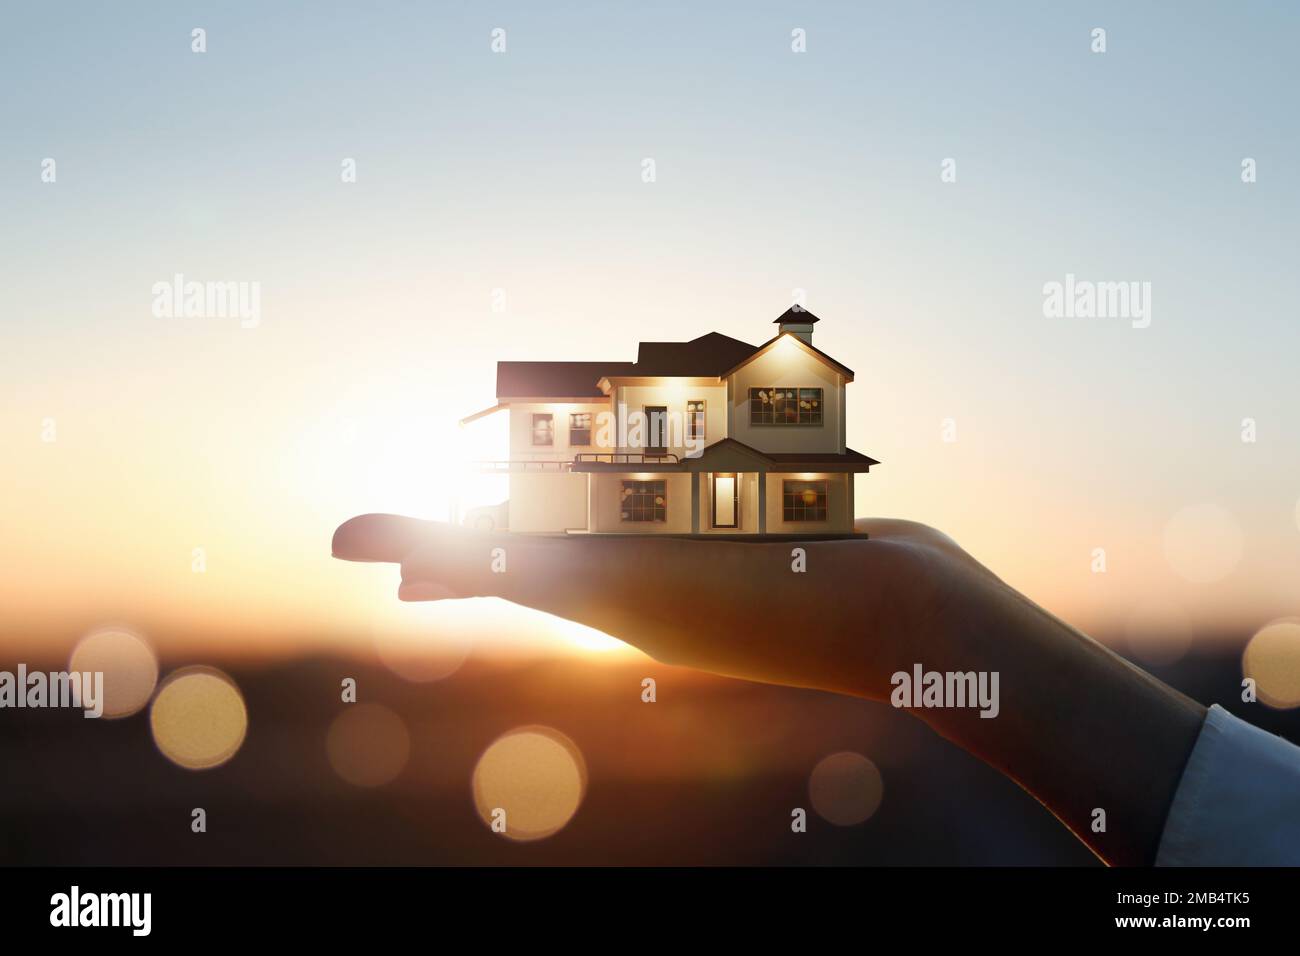 My precious home on the hands of a happy family and real estate investment and housing architecture and sunset background Stock Photo